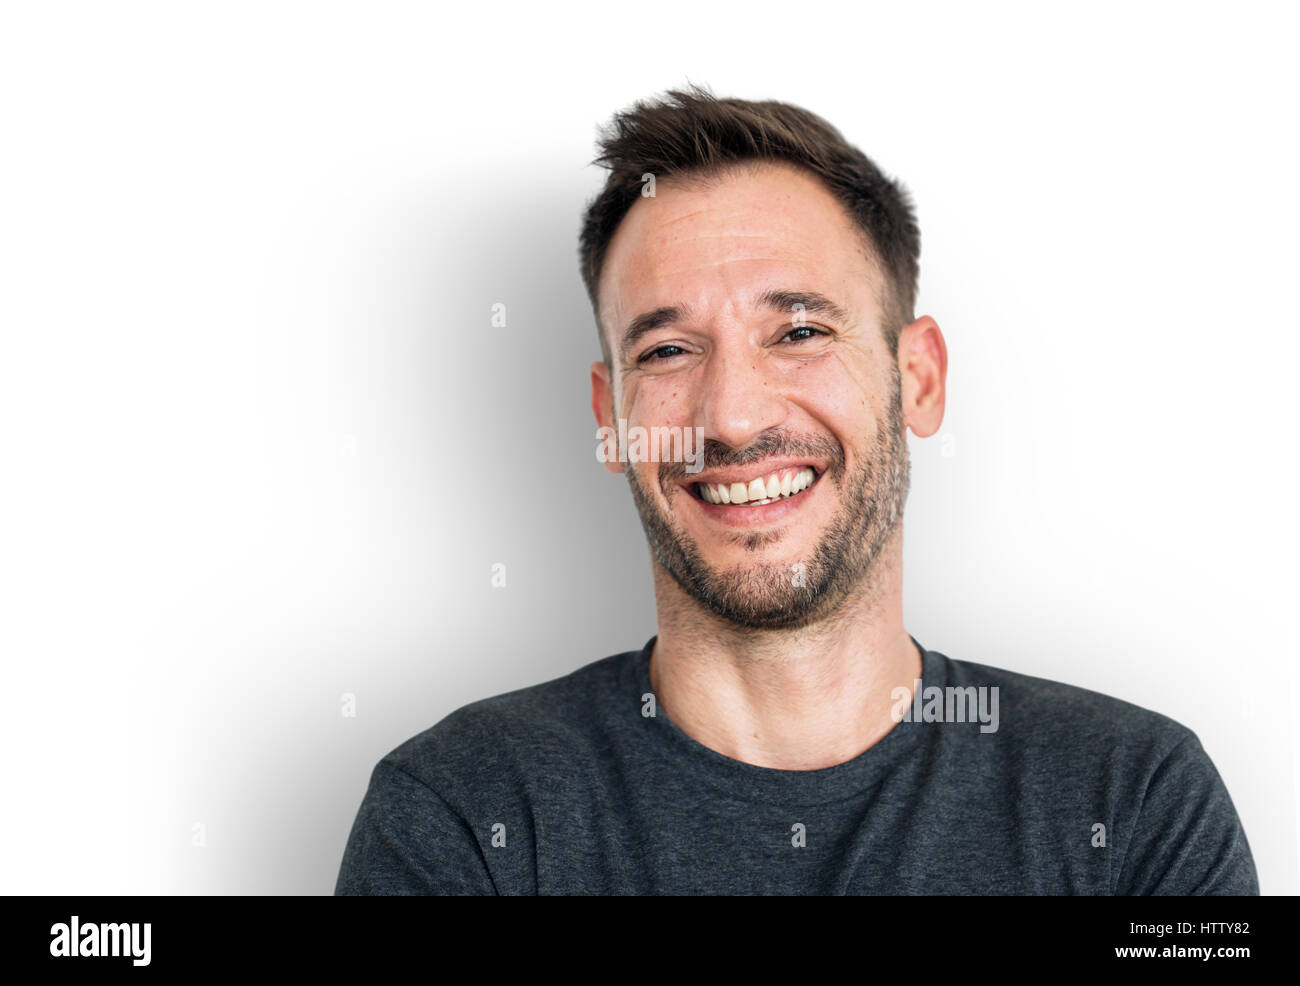 Man Smiling Happiness Carefree Emotional Expression Concept Stock Photo